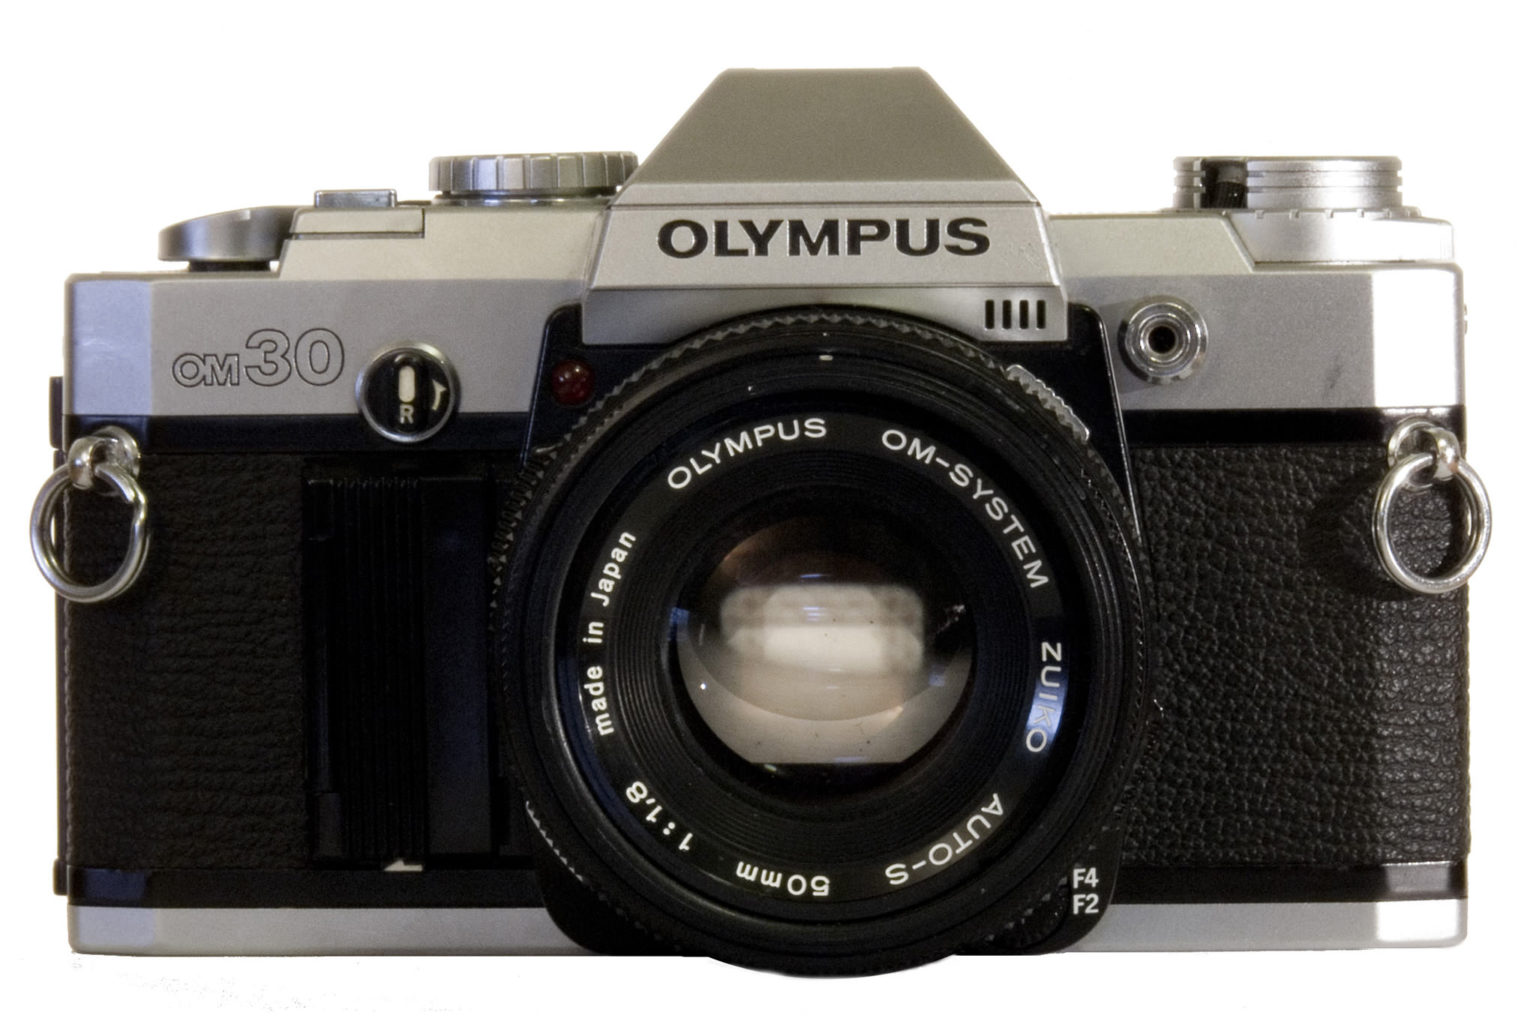 Olympus OM-30 - Functions, History & more about the 35mm SLR camera